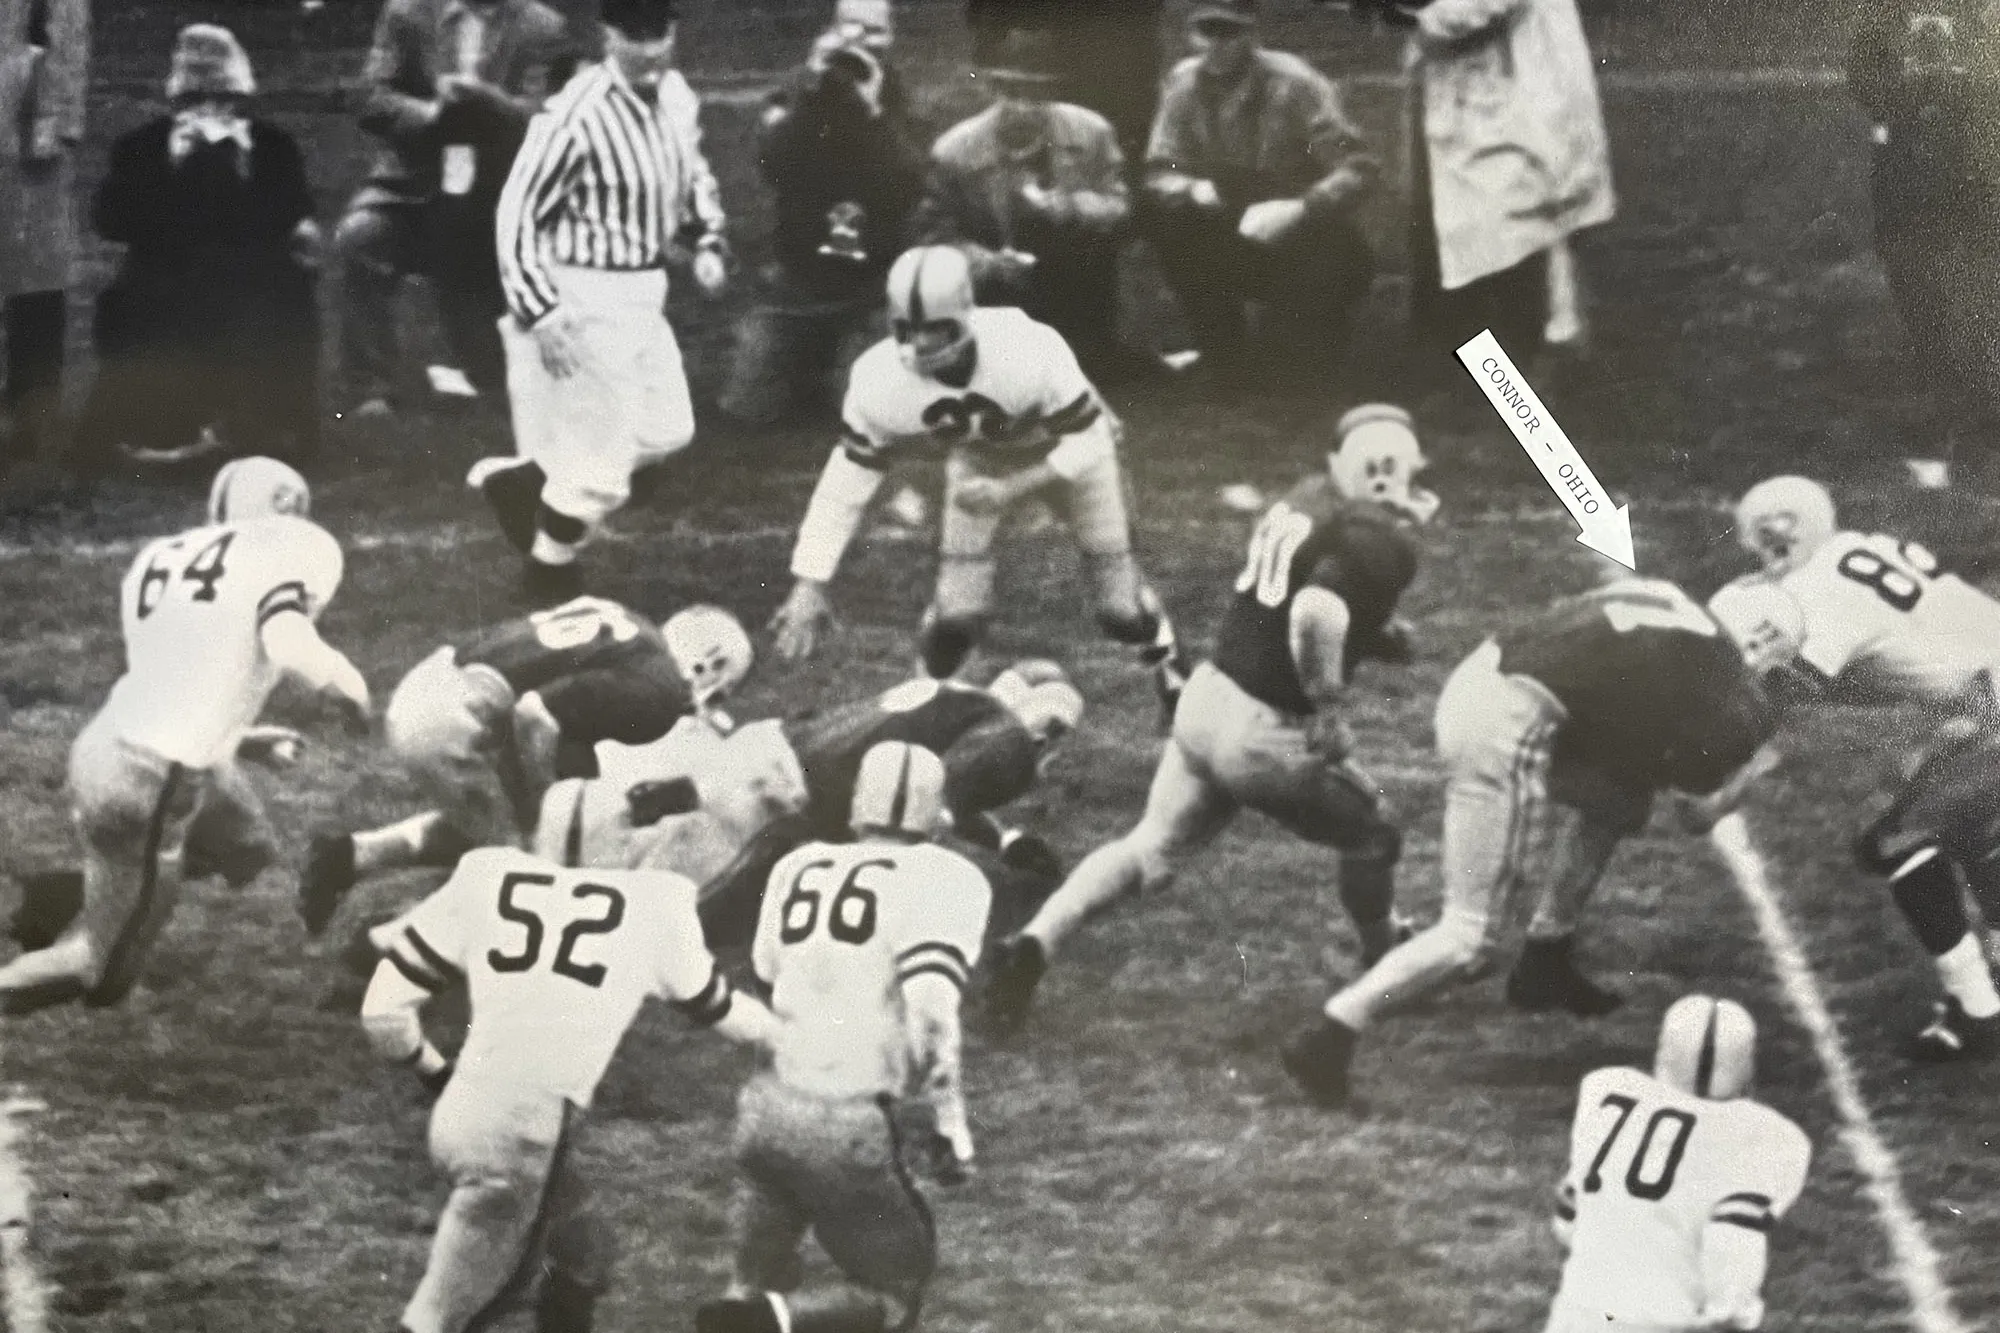 In a black-and-white photo from 1961, four Ohio State football players are surrounded by six defensemen from Iowa. The ball carrier is last in the line of Buckeyes while Daniel Connor is first, ramming an Iowa players.